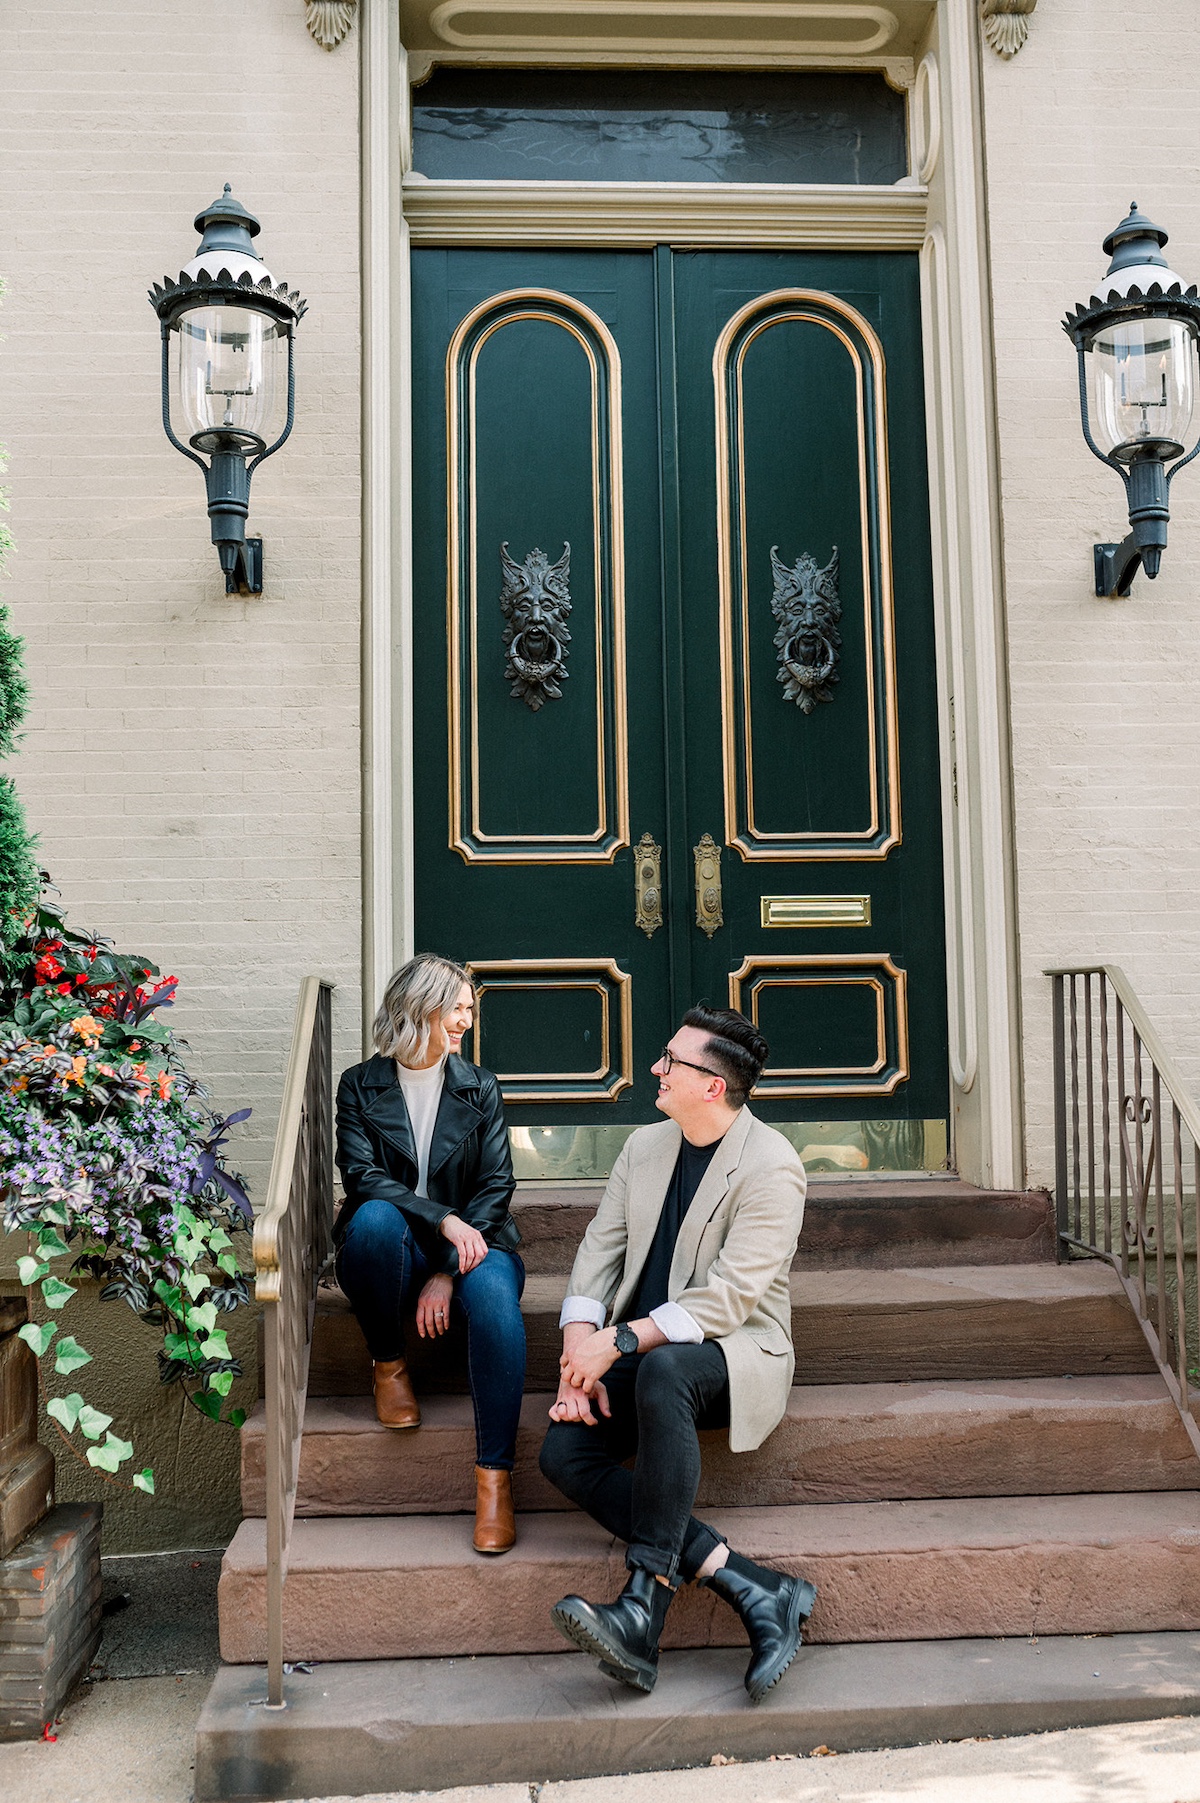 The architectural charm of Lancaster City serves as an enchanting backdrop for Ville & Rue's branding photography campaign. It encapsulates the brand's connection to its local roots, adding a unique touch to the images.